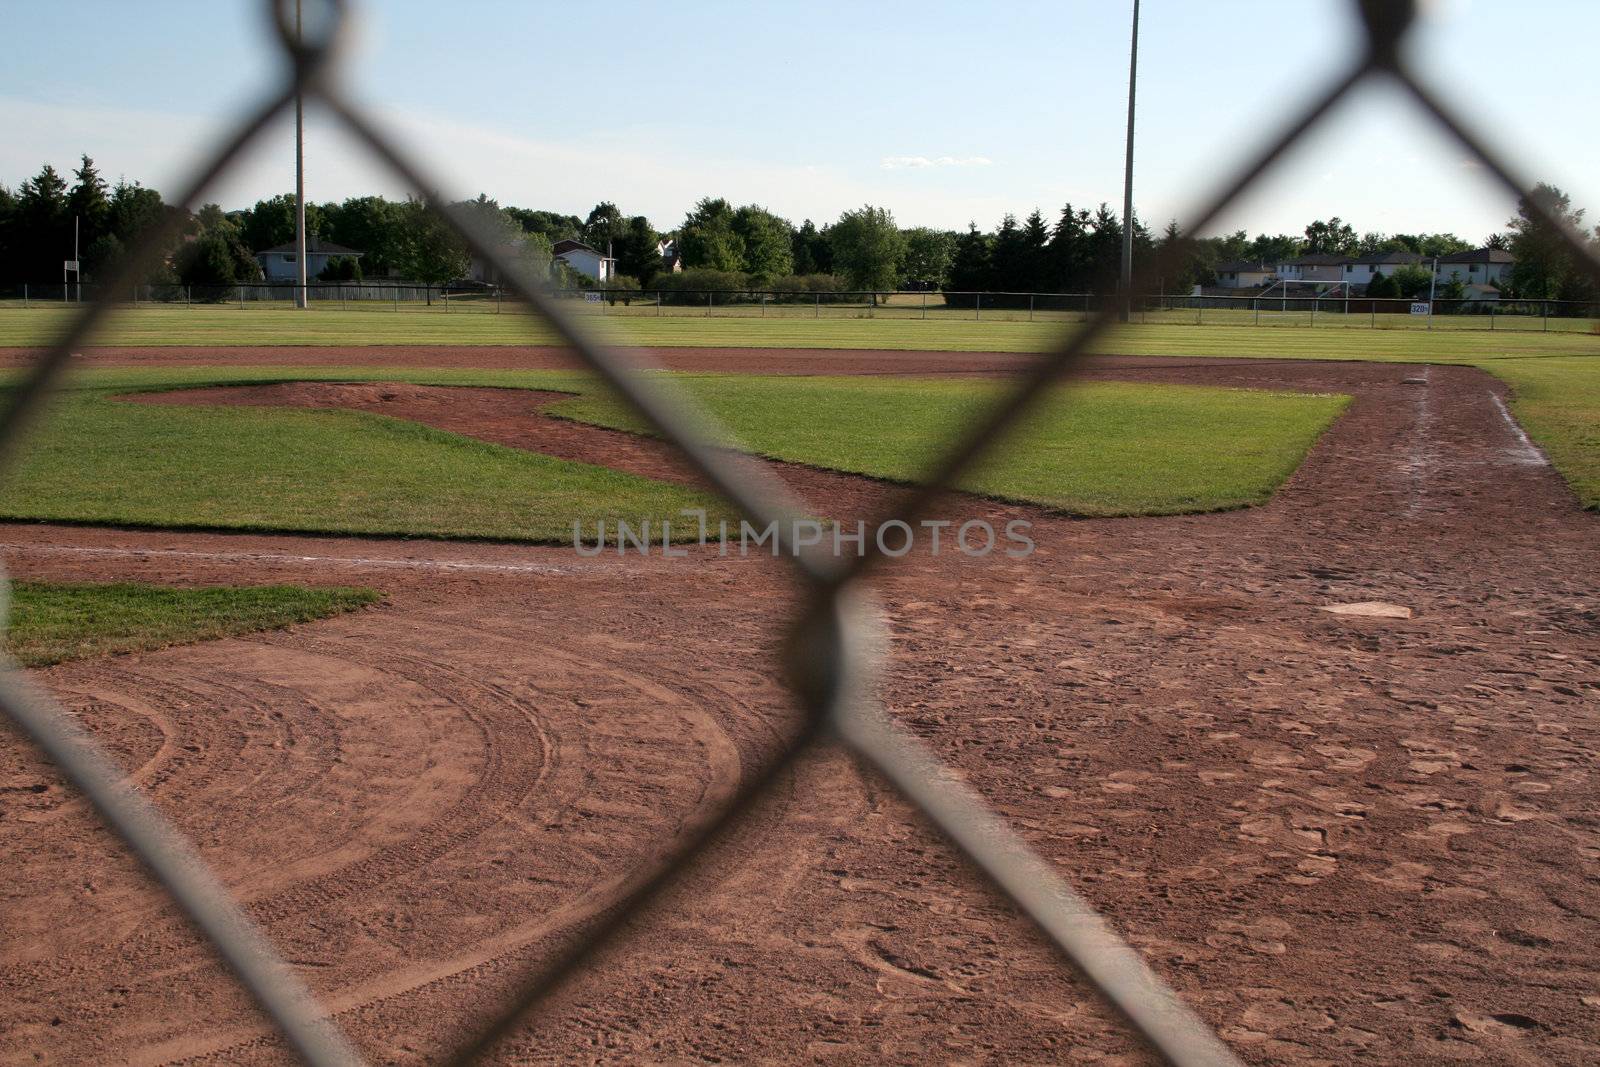 The view of a ball diamond from behind the fench.